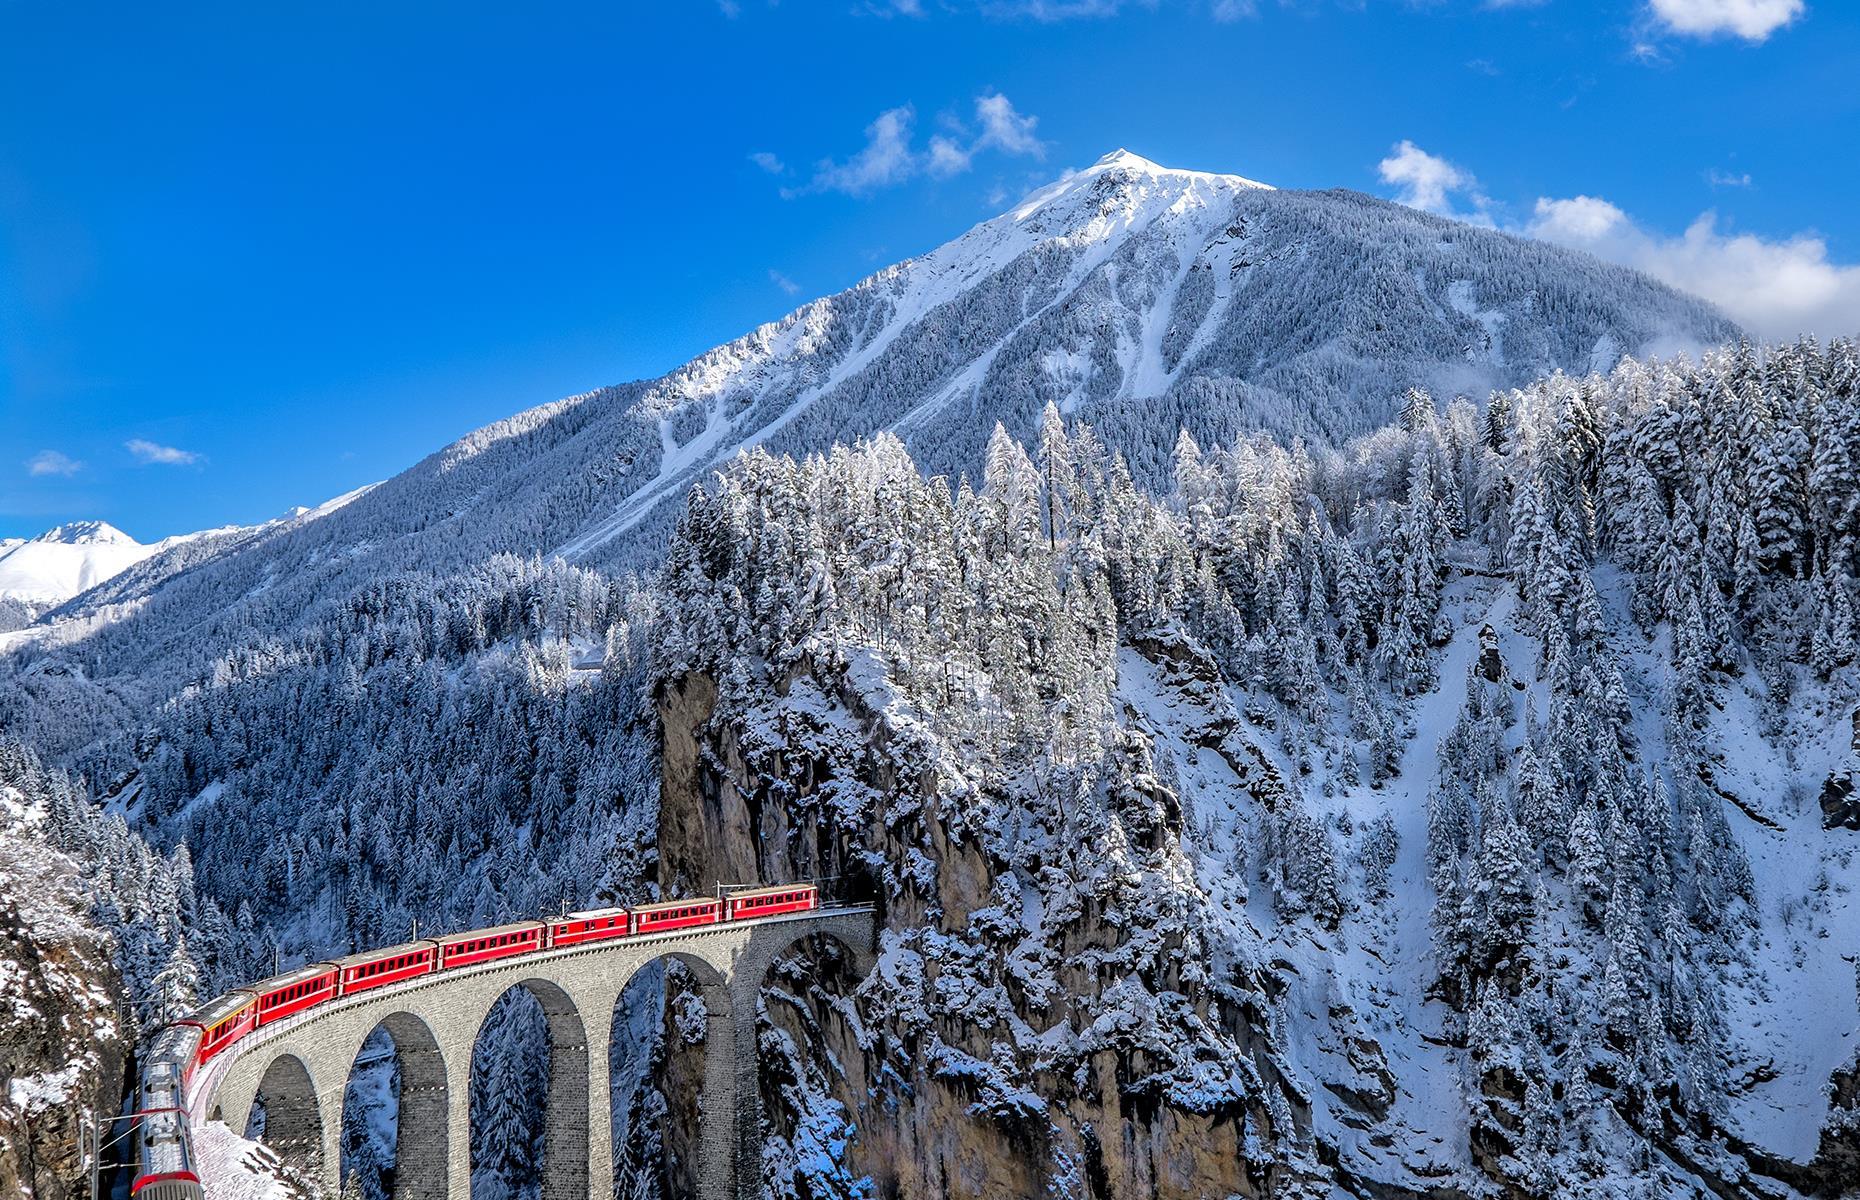 <p>Connecting the mountain resorts of Zermatt and St Moritz, the <a href="https://www.glacierexpress.ch/en/">Glacier Express</a> is a brilliant way of seeing some of the most beautiful views in the Swiss Alps. The scenic route takes in sights including the Oberalp Pass, the highest point of the journey, and the Landwasser Viaduct (pictured) – a six-arch bridge which stands at 213 feet (65m) and plunges straight into a tunnel that leads through the mountain. </p>